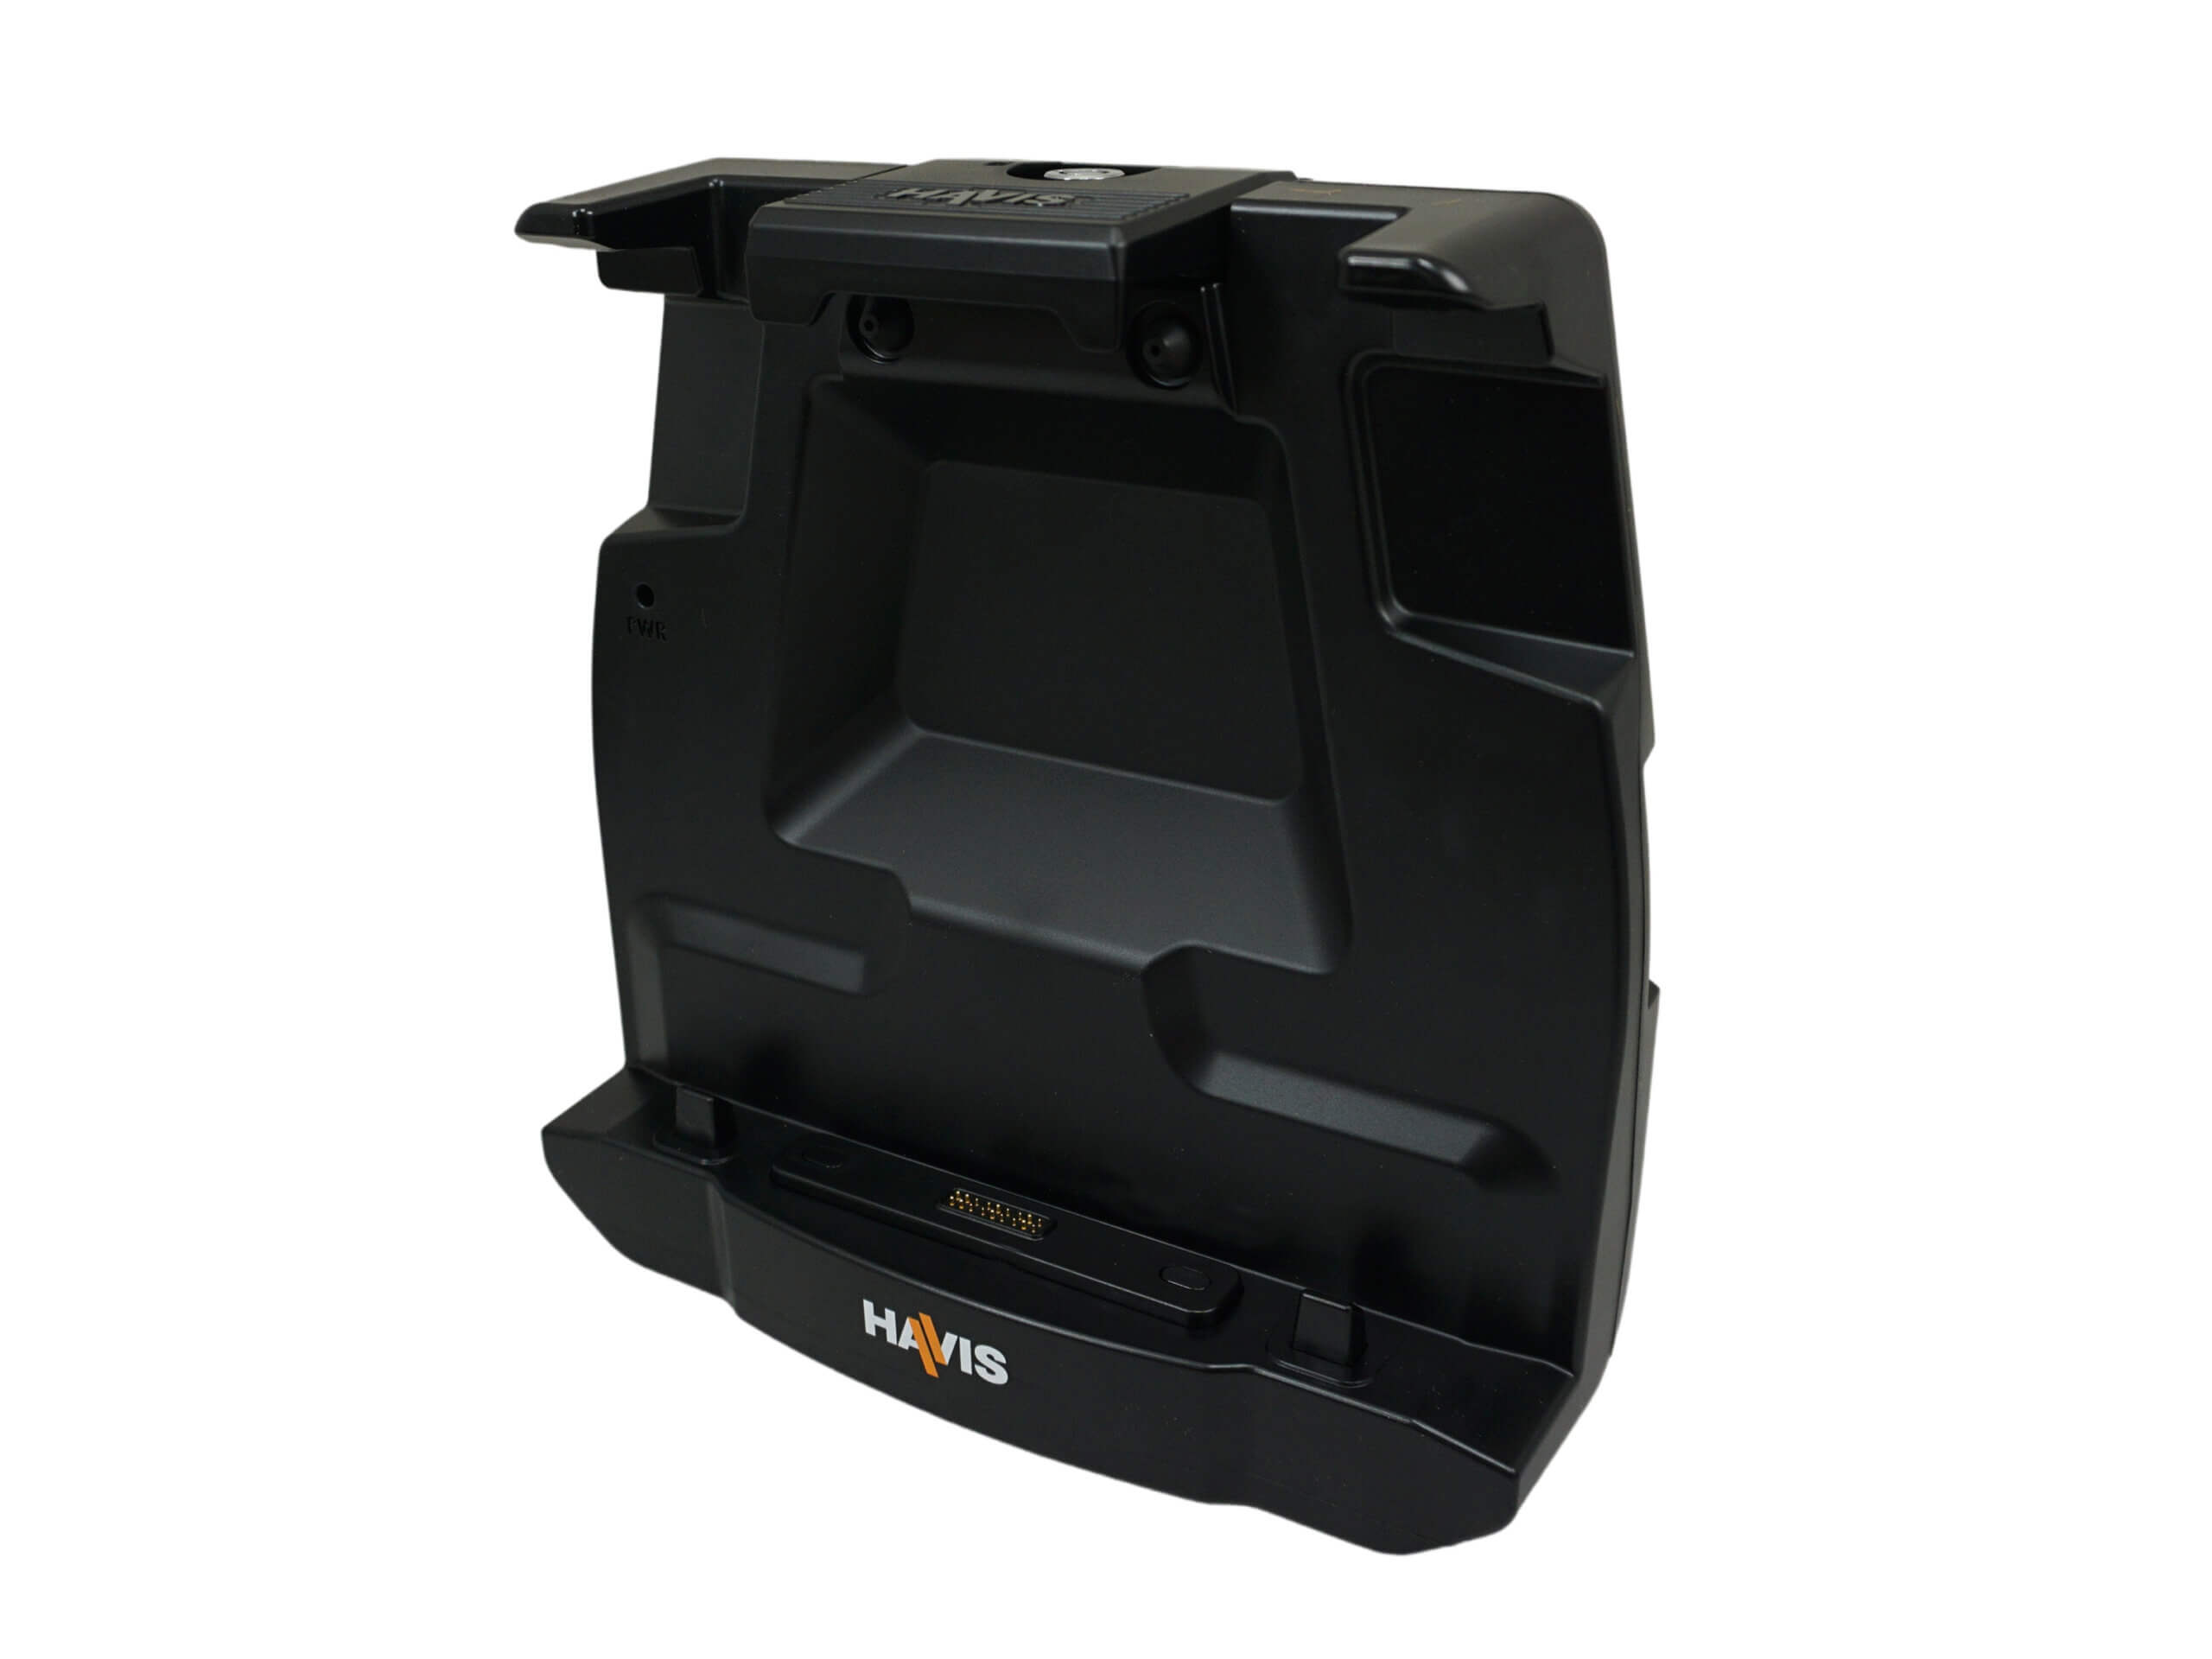 Docking Station for Dell’s 7230 Tablet with Advanced Port Replication